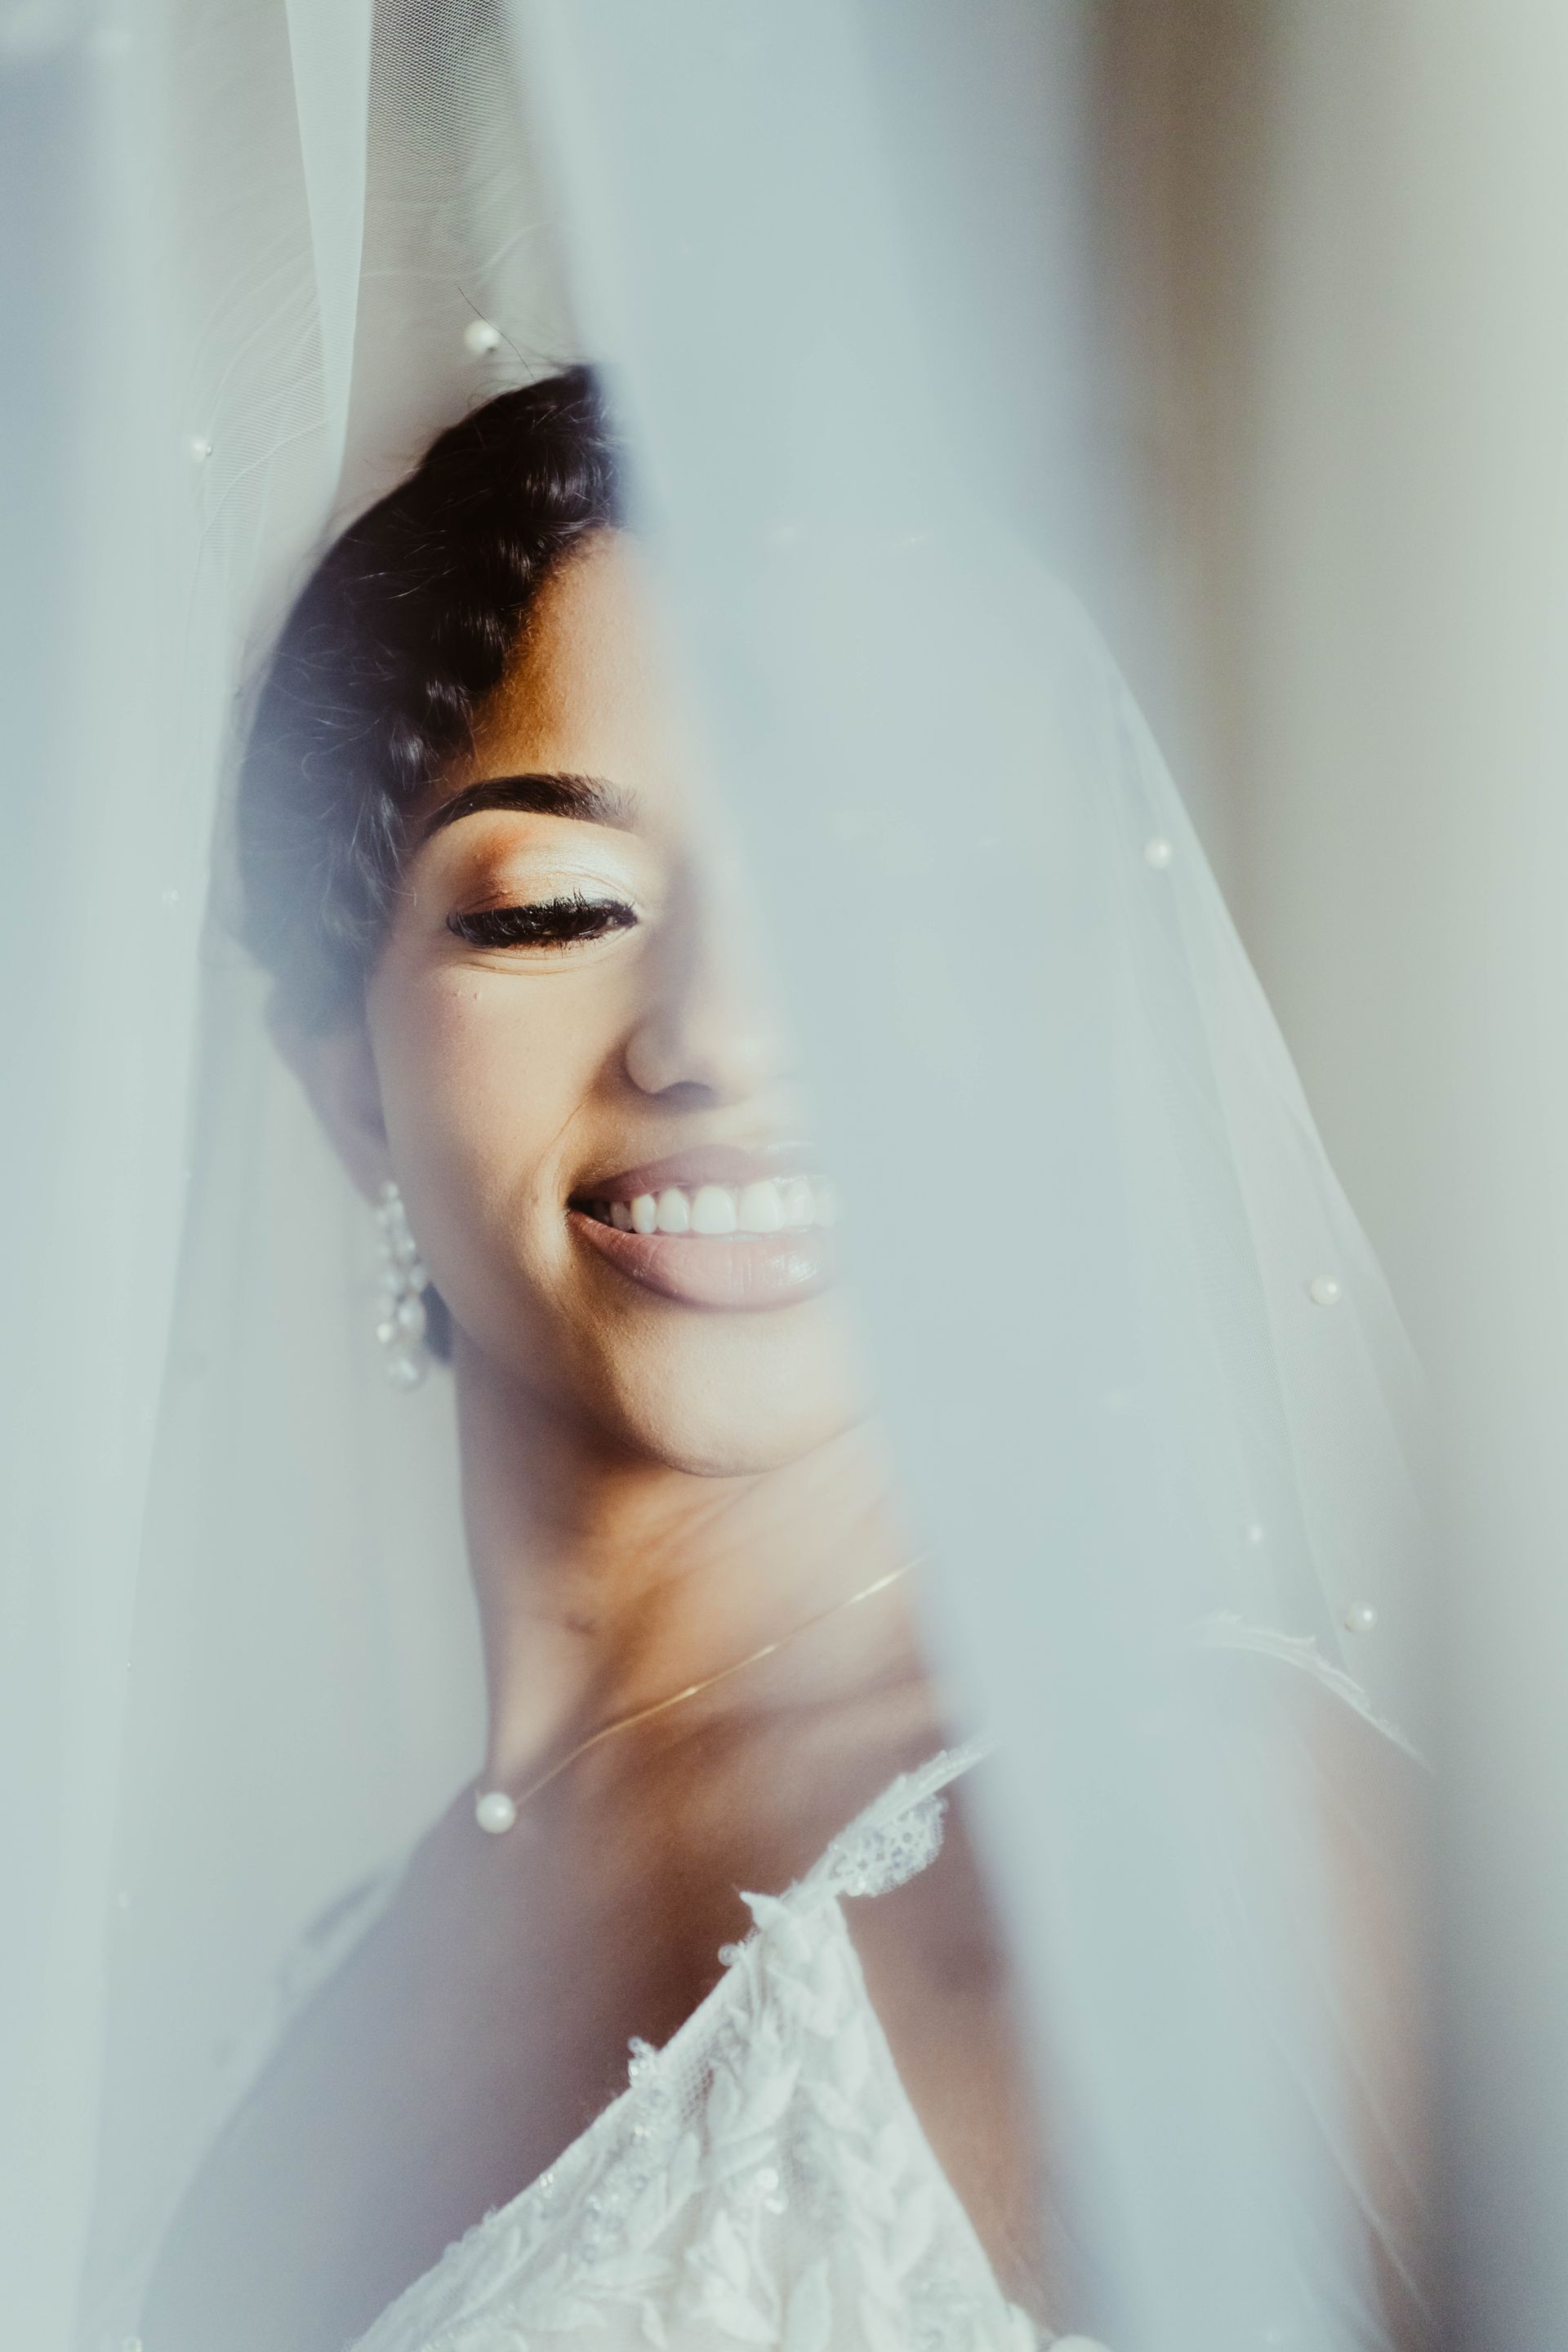 a close up of a bride wearing a veil and smiling .